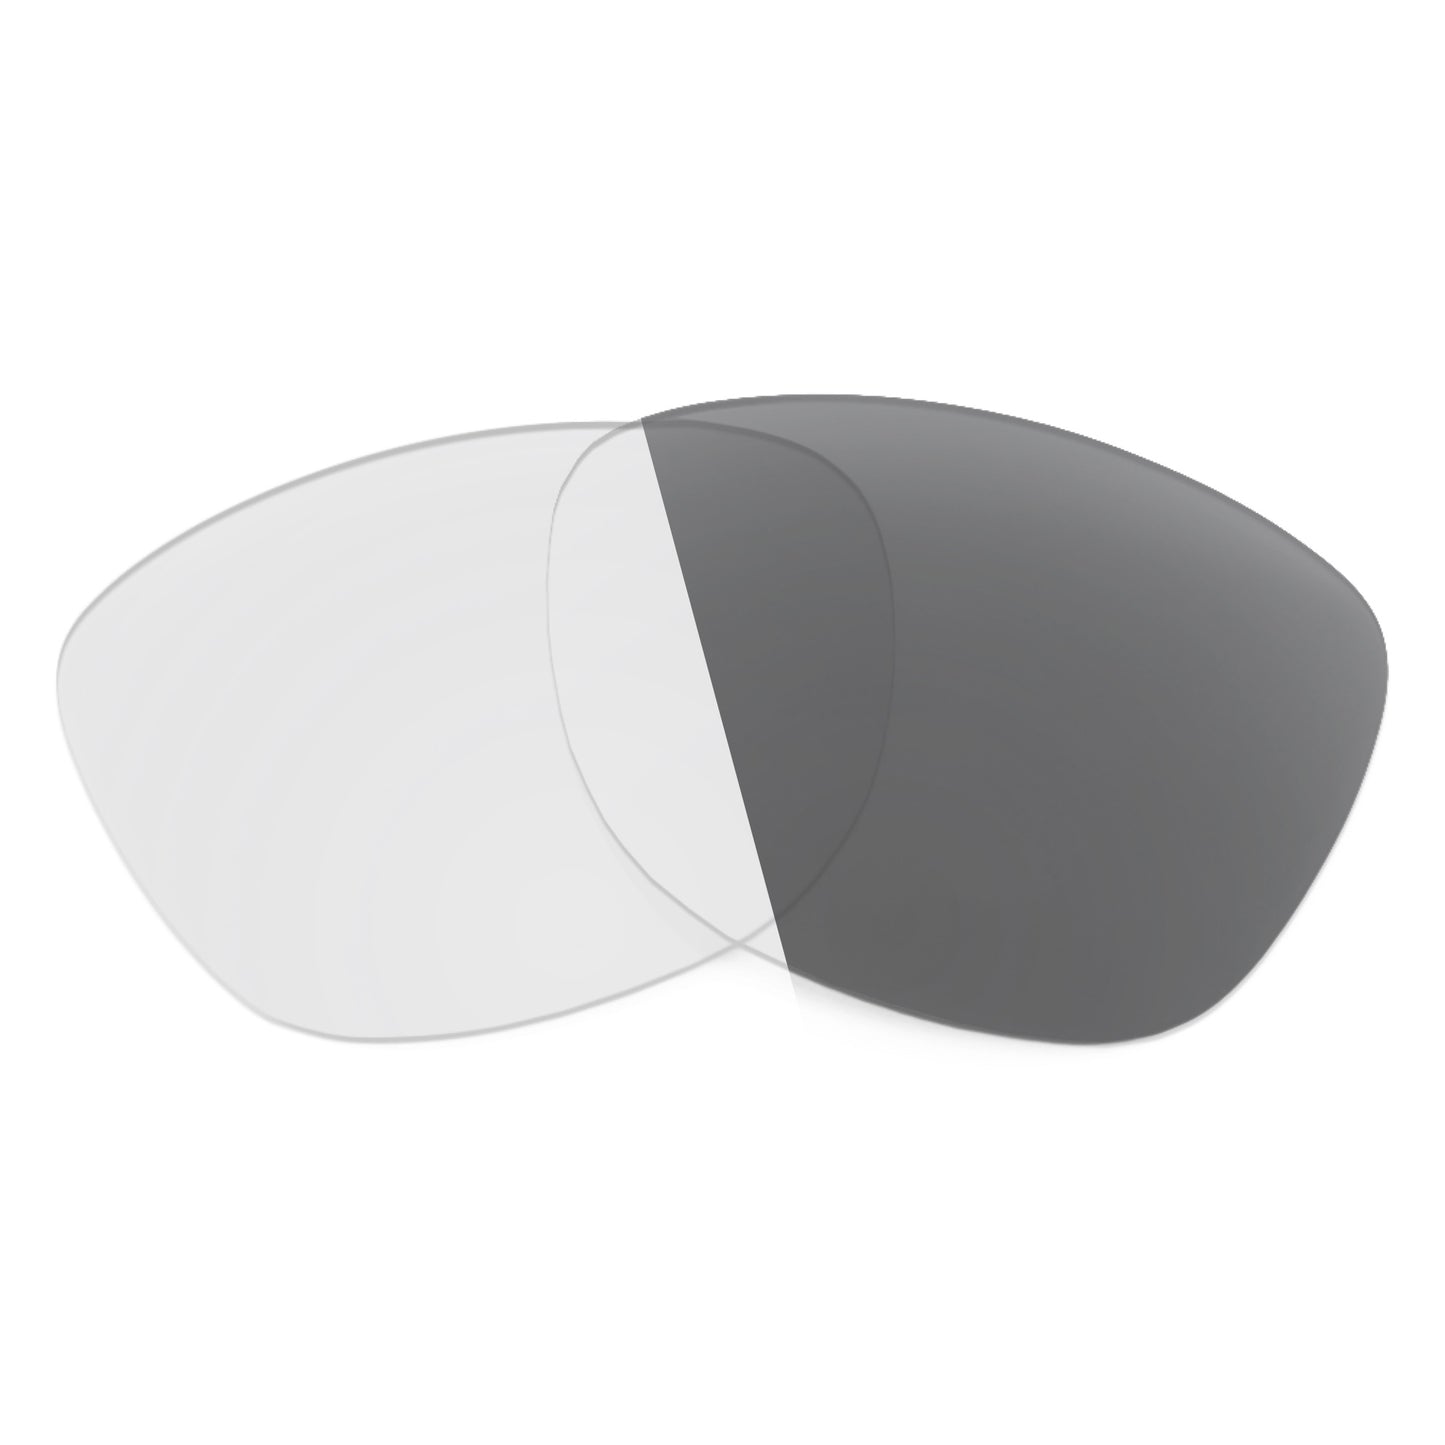 Revant replacement lenses for Ray-Ban Mr. Burbank RB2283 52mm Non-Polarized Adapt Gray Photochromic